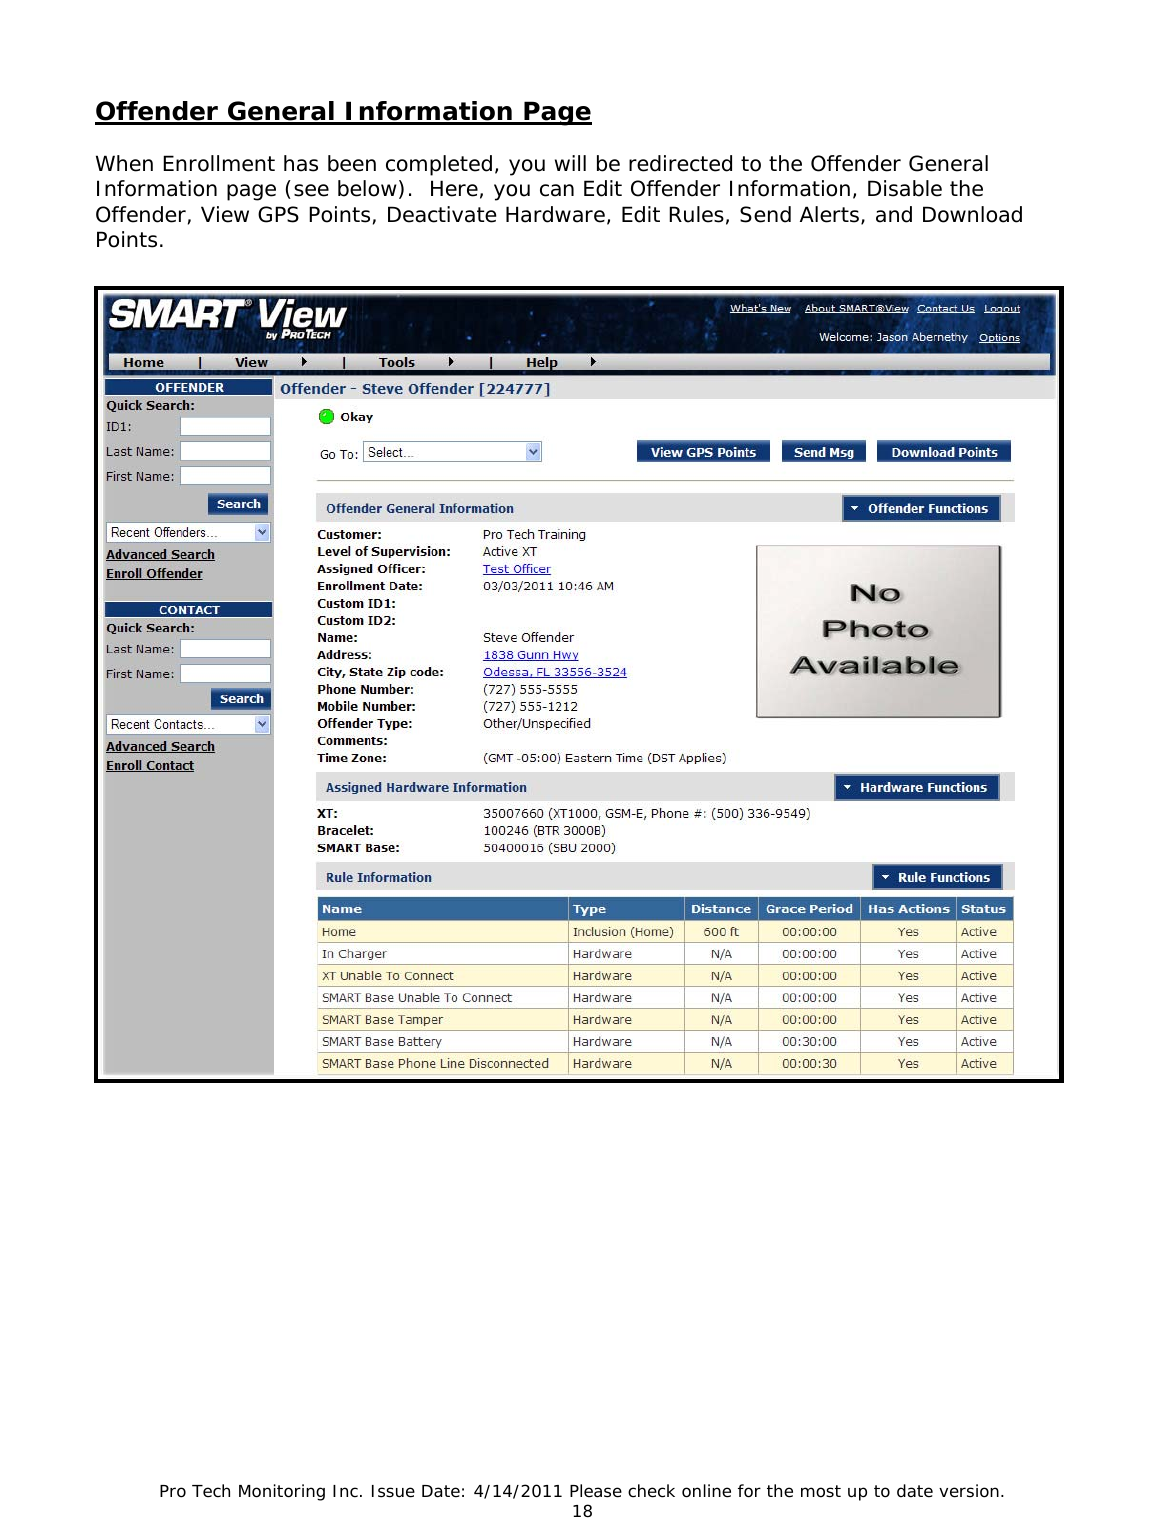 Pro Tech Monitoring Inc. Issue Date: 4/14/2011 Please check online for the most up to date version. 18  Offender General Information Page  When Enrollment has been completed, you will be redirected to the Offender General Information page (see below).  Here, you can Edit Offender Information, Disable the Offender, View GPS Points, Deactivate Hardware, Edit Rules, Send Alerts, and Download Points.    